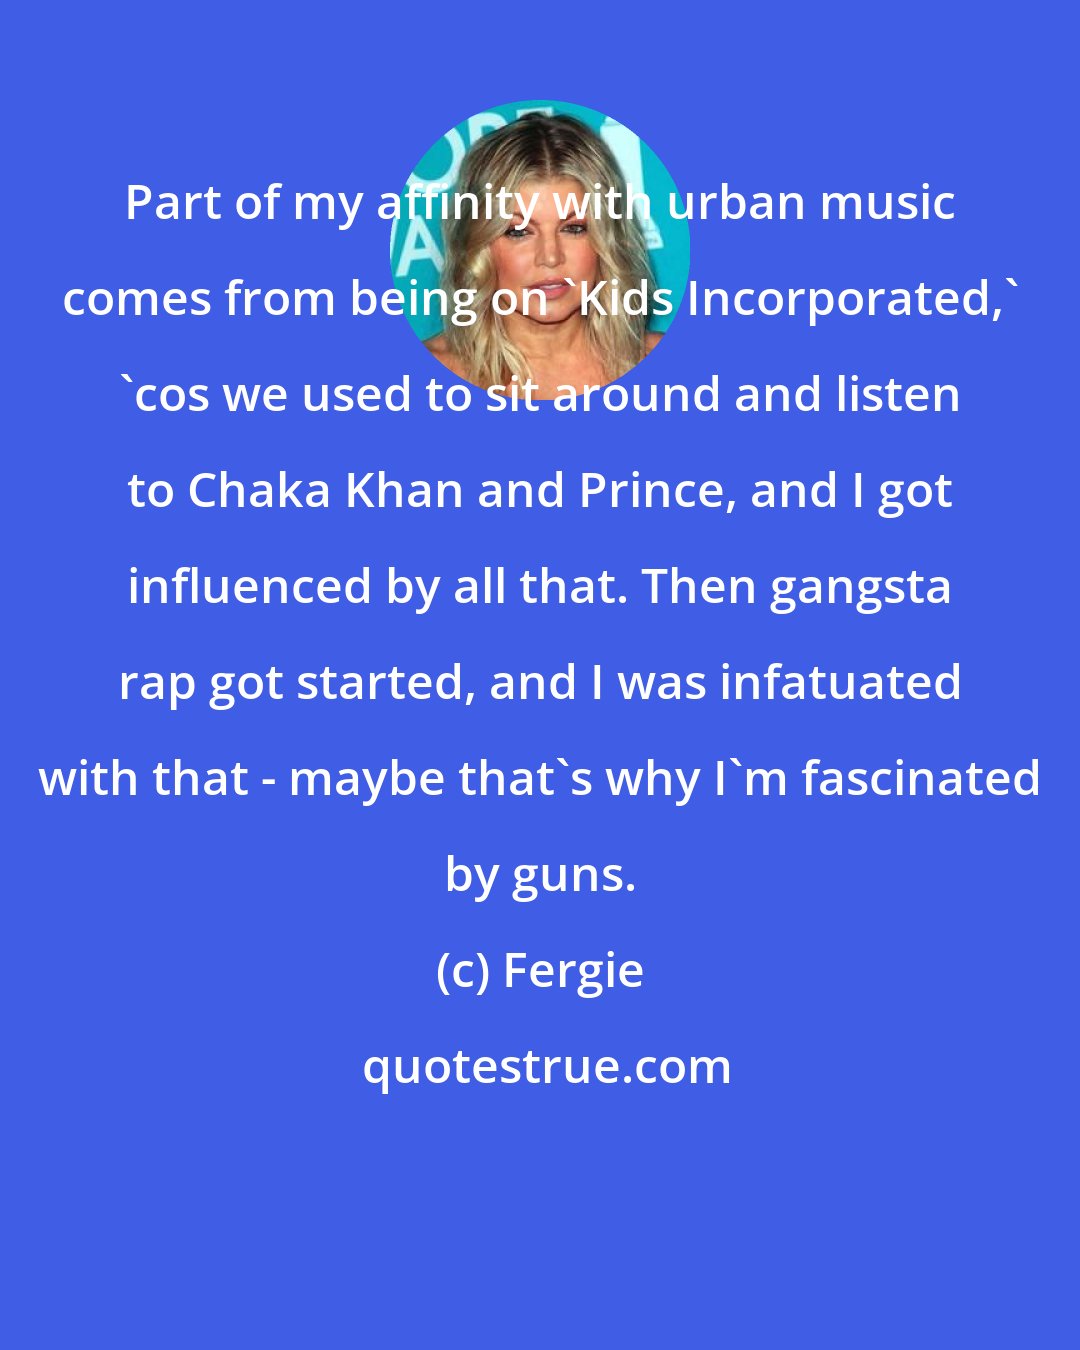 Fergie: Part of my affinity with urban music comes from being on 'Kids Incorporated,' 'cos we used to sit around and listen to Chaka Khan and Prince, and I got influenced by all that. Then gangsta rap got started, and I was infatuated with that - maybe that's why I'm fascinated by guns.